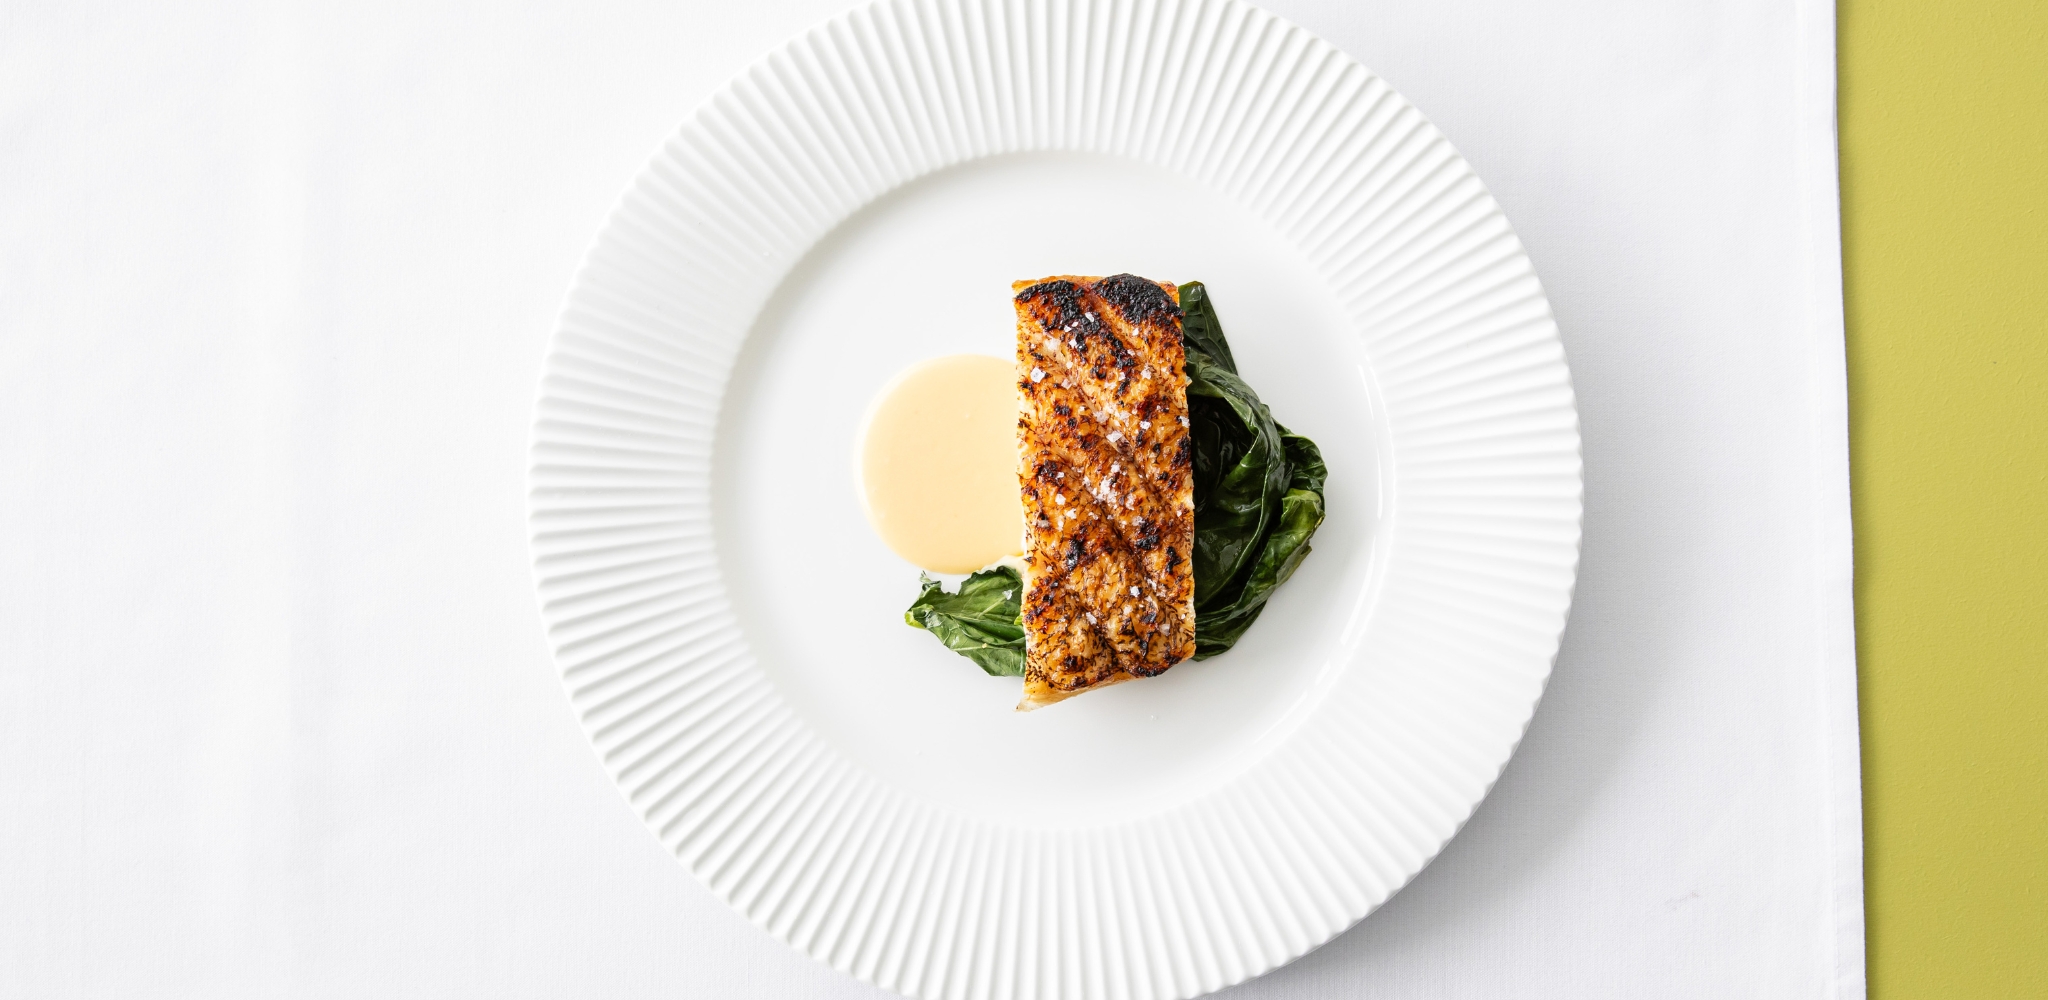 Image of Chris Bolton Coral Trout with Limoncello Beurre Blanc and greens on a large white plate with white linen served at Bistro George.